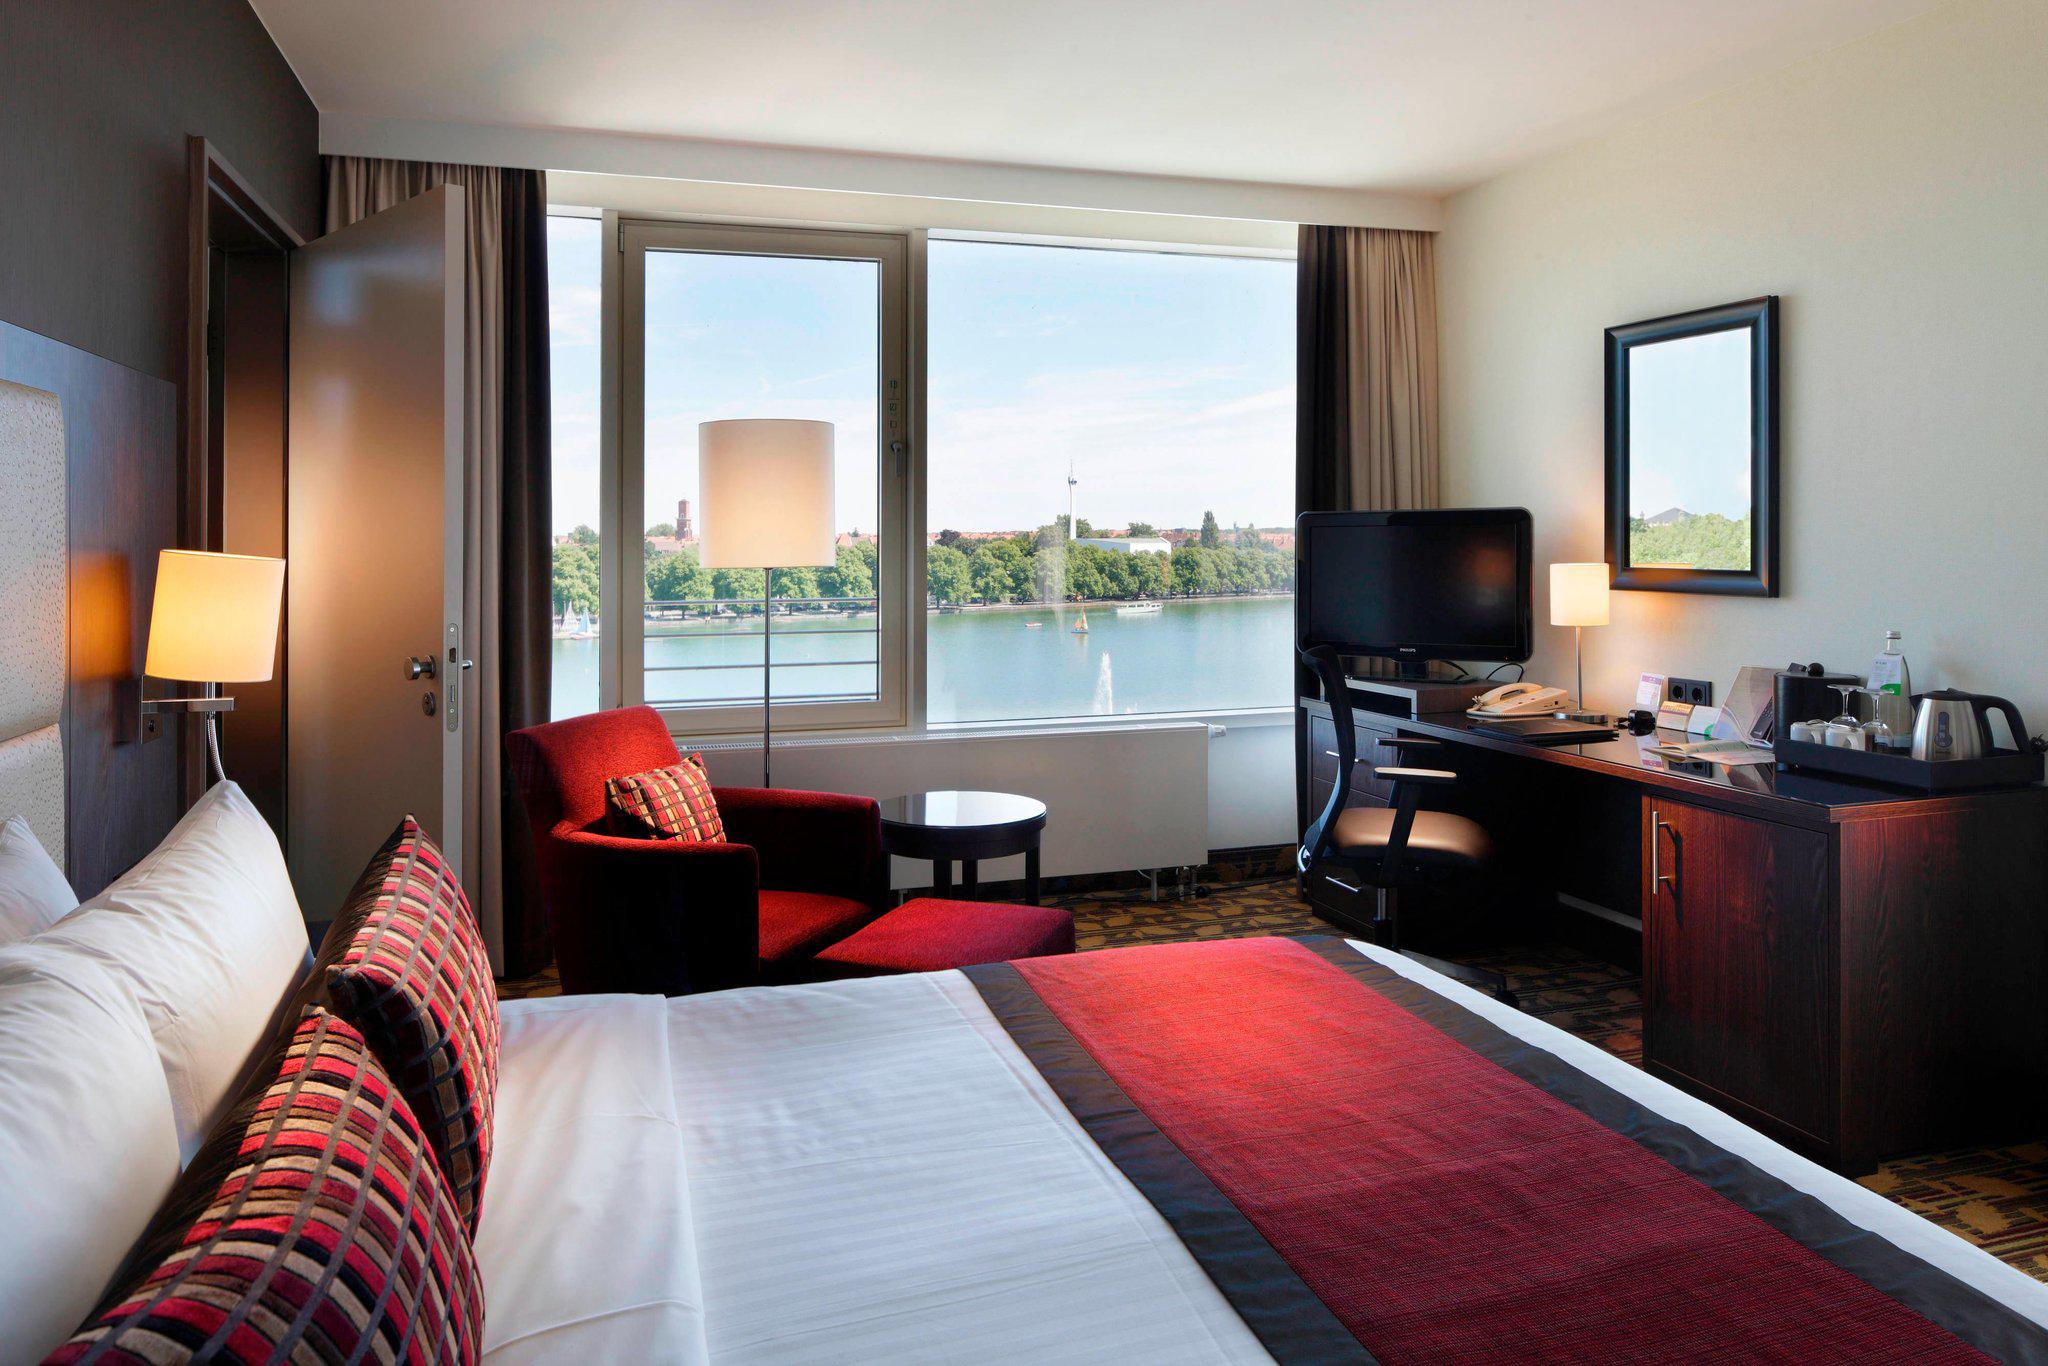 Courtyard by Marriott Hannover Maschsee